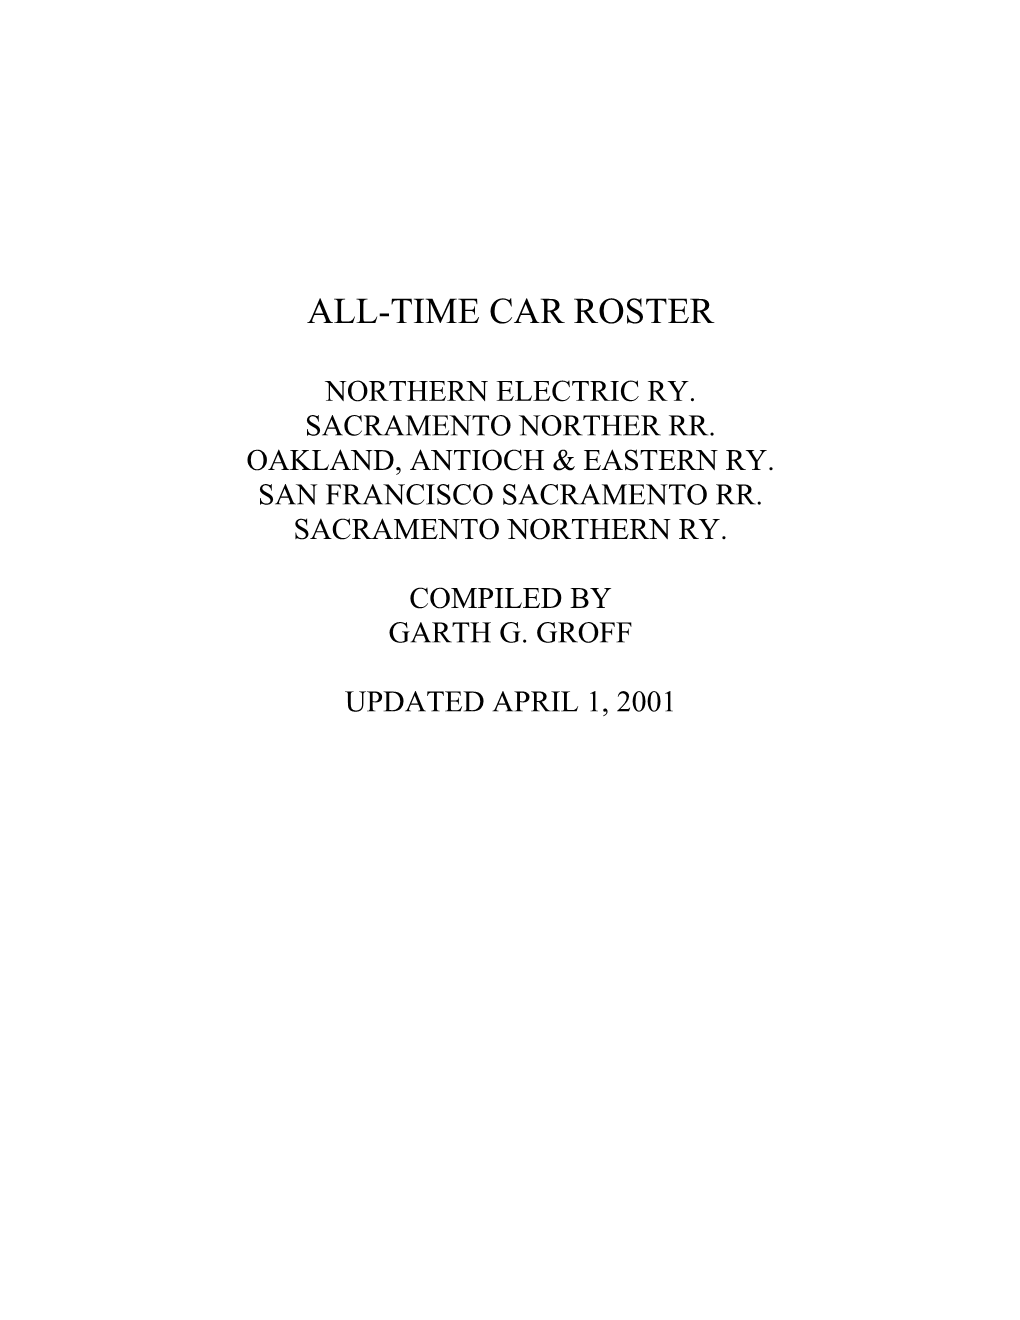 All-Time Car Roster